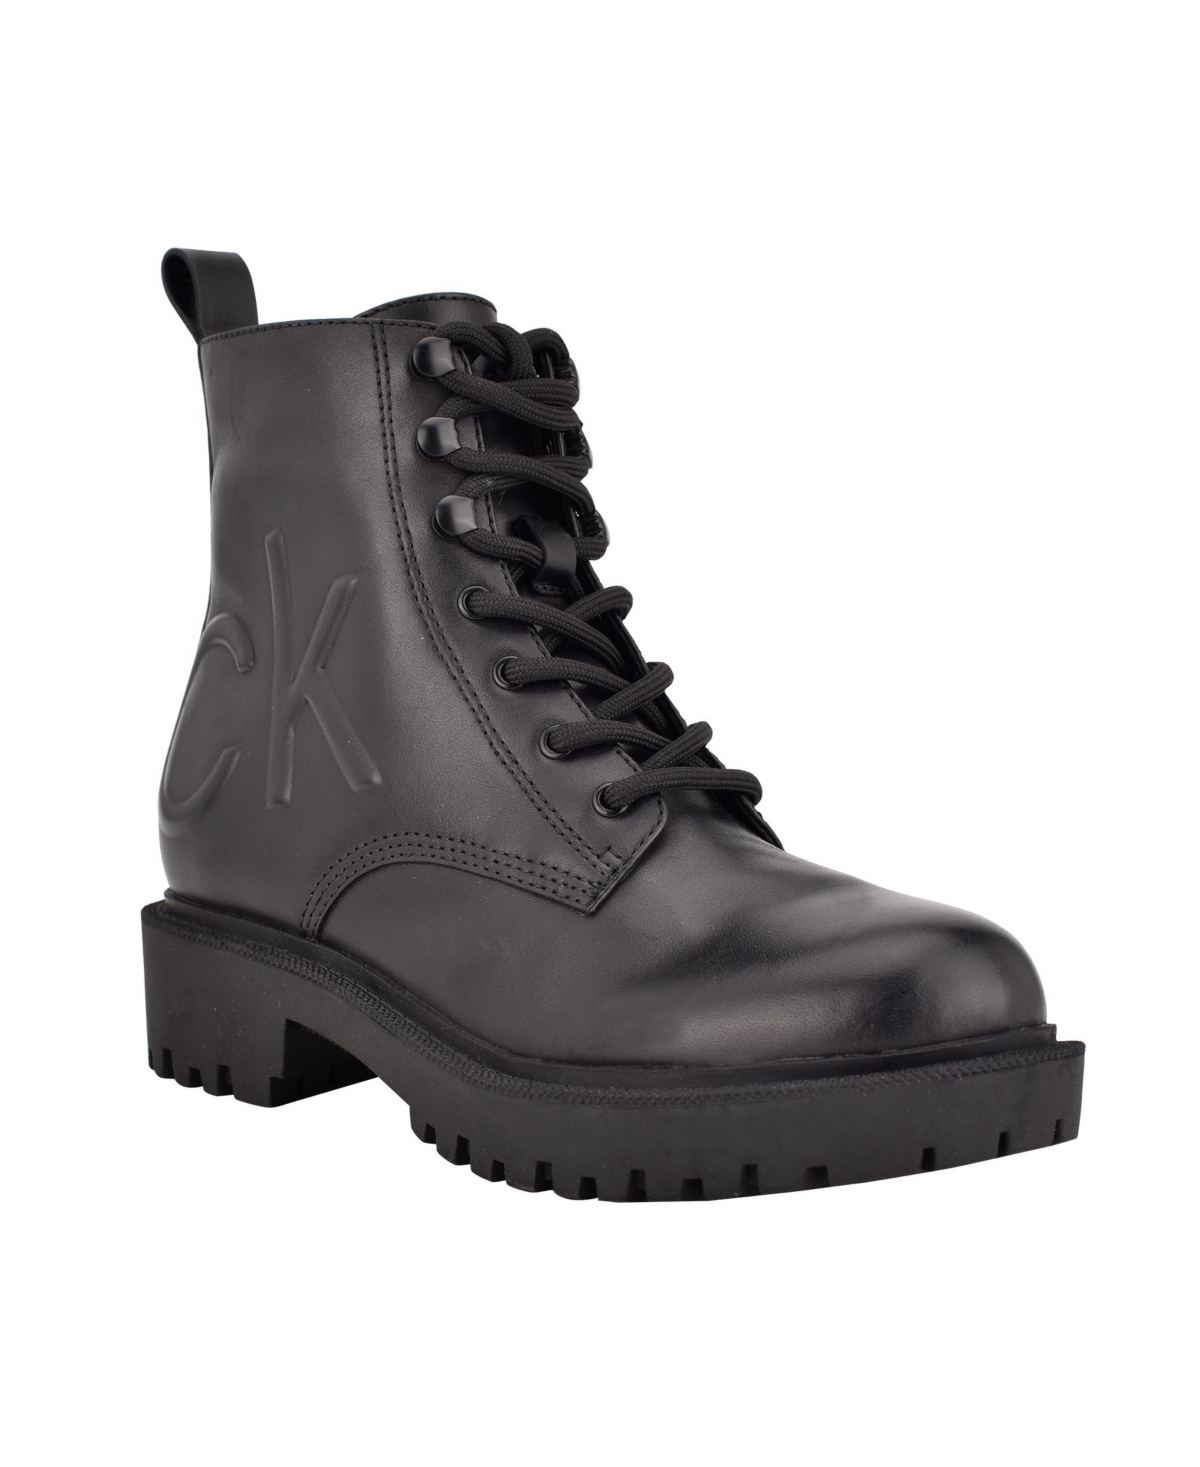 UPC 195972016019 product image for Calvin Klein Women's Kamry Lace Up Logo Lug Sole Combat Booties Women's Shoes | upcitemdb.com